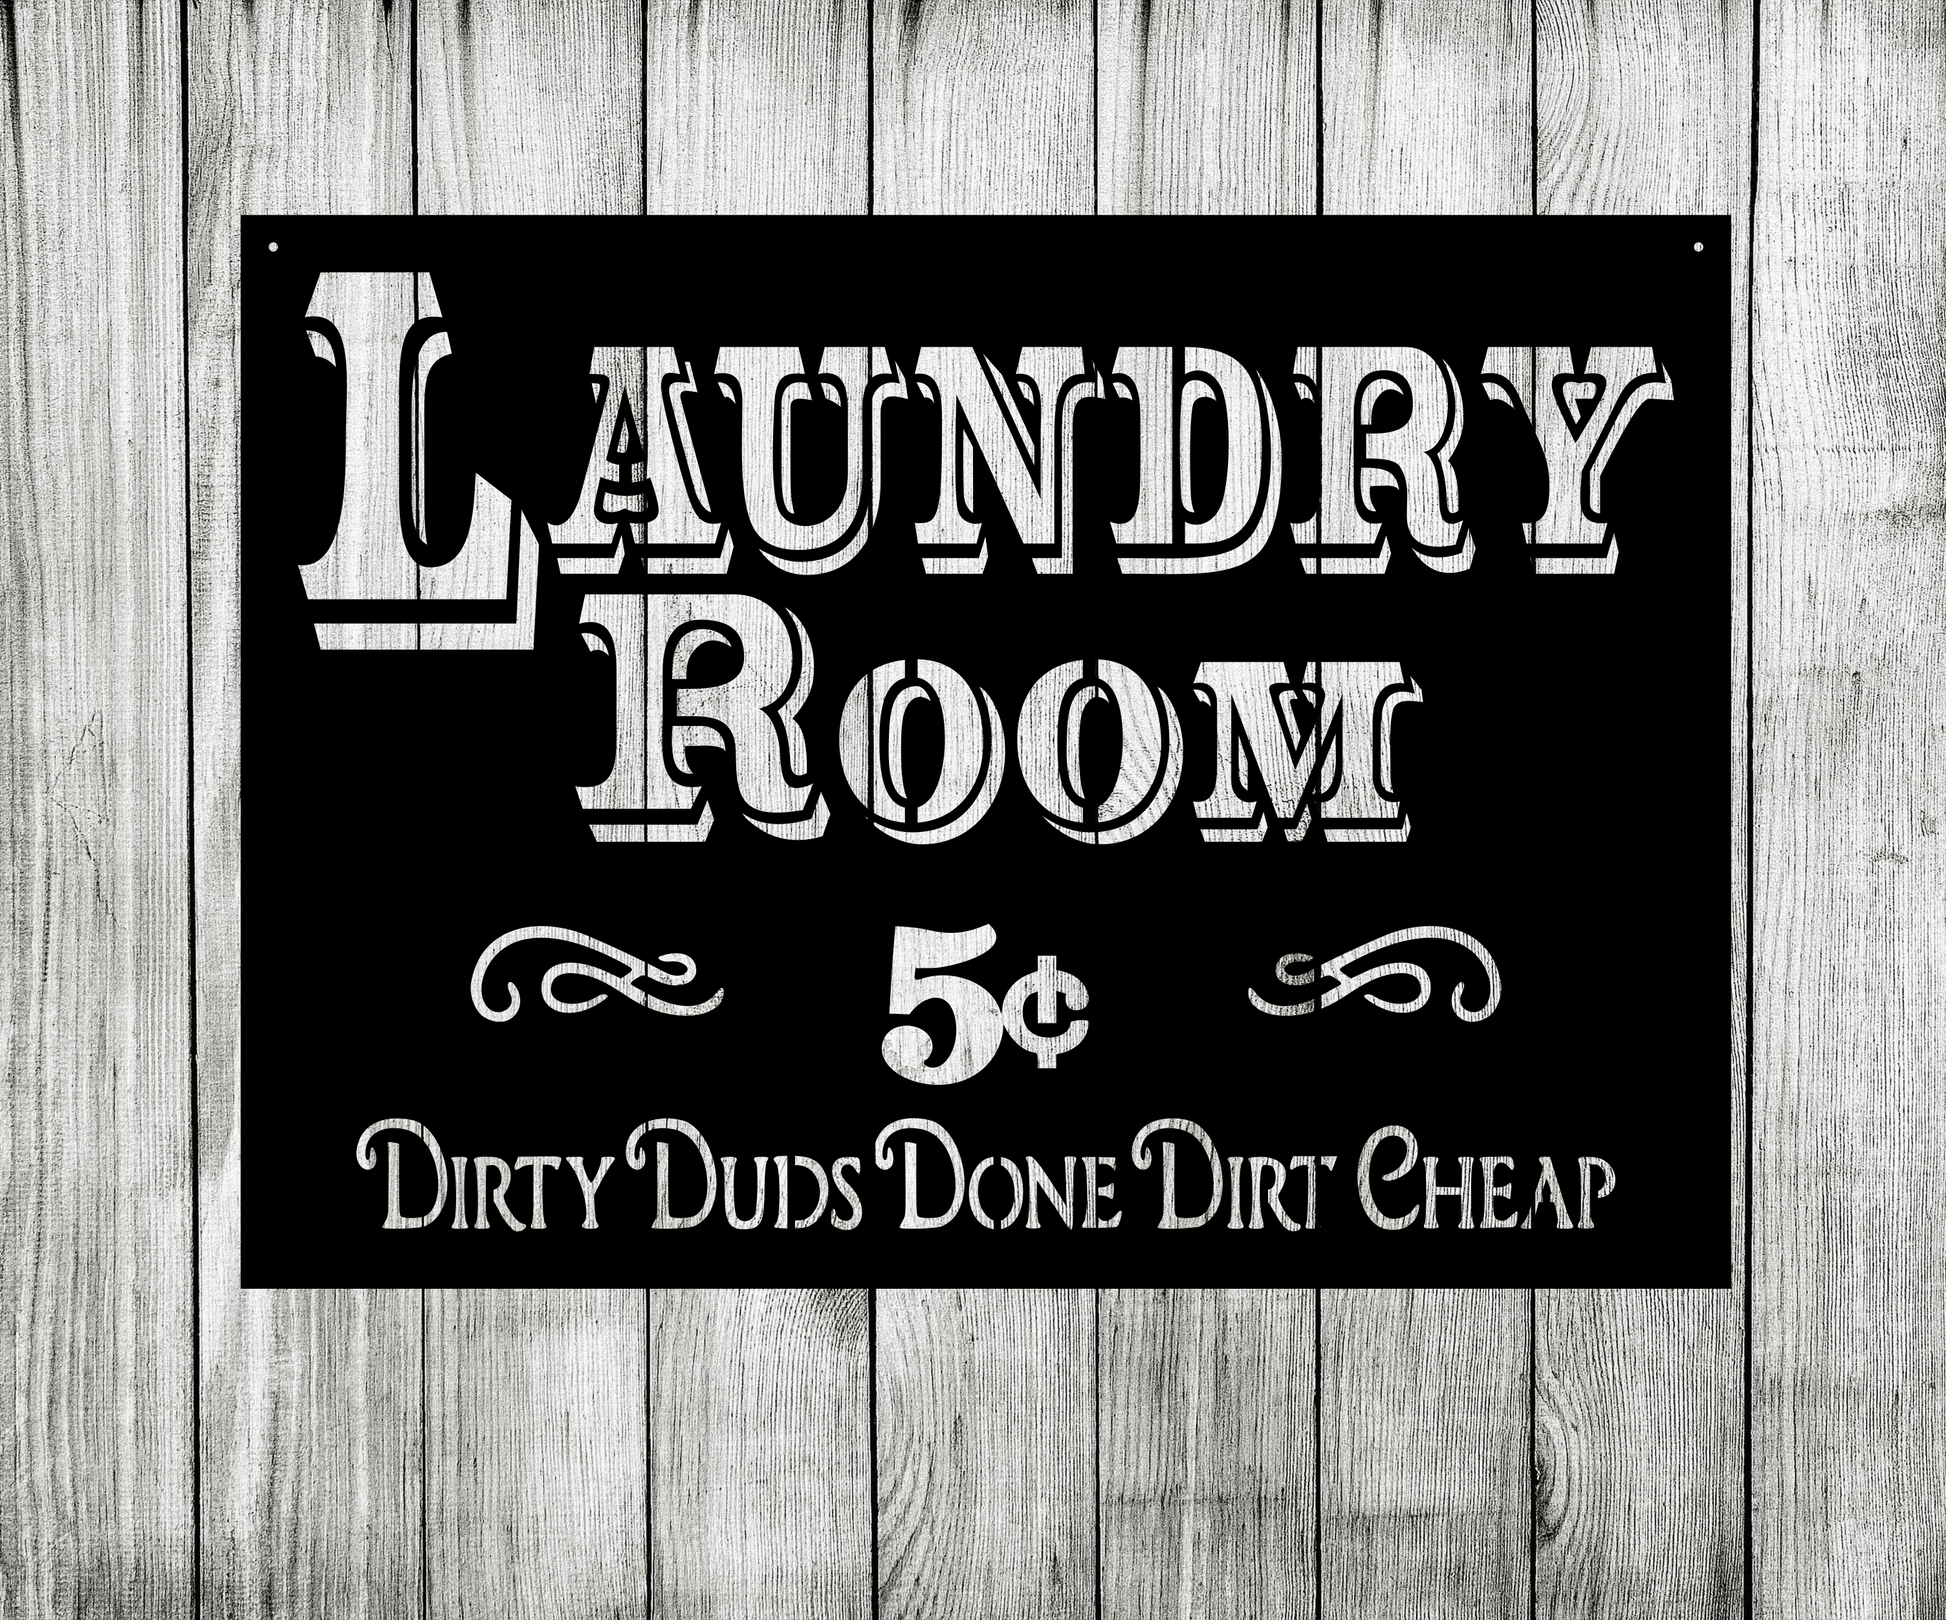 Laundry Room Dirty Duds Done Dirt Cheap Home Décor sign